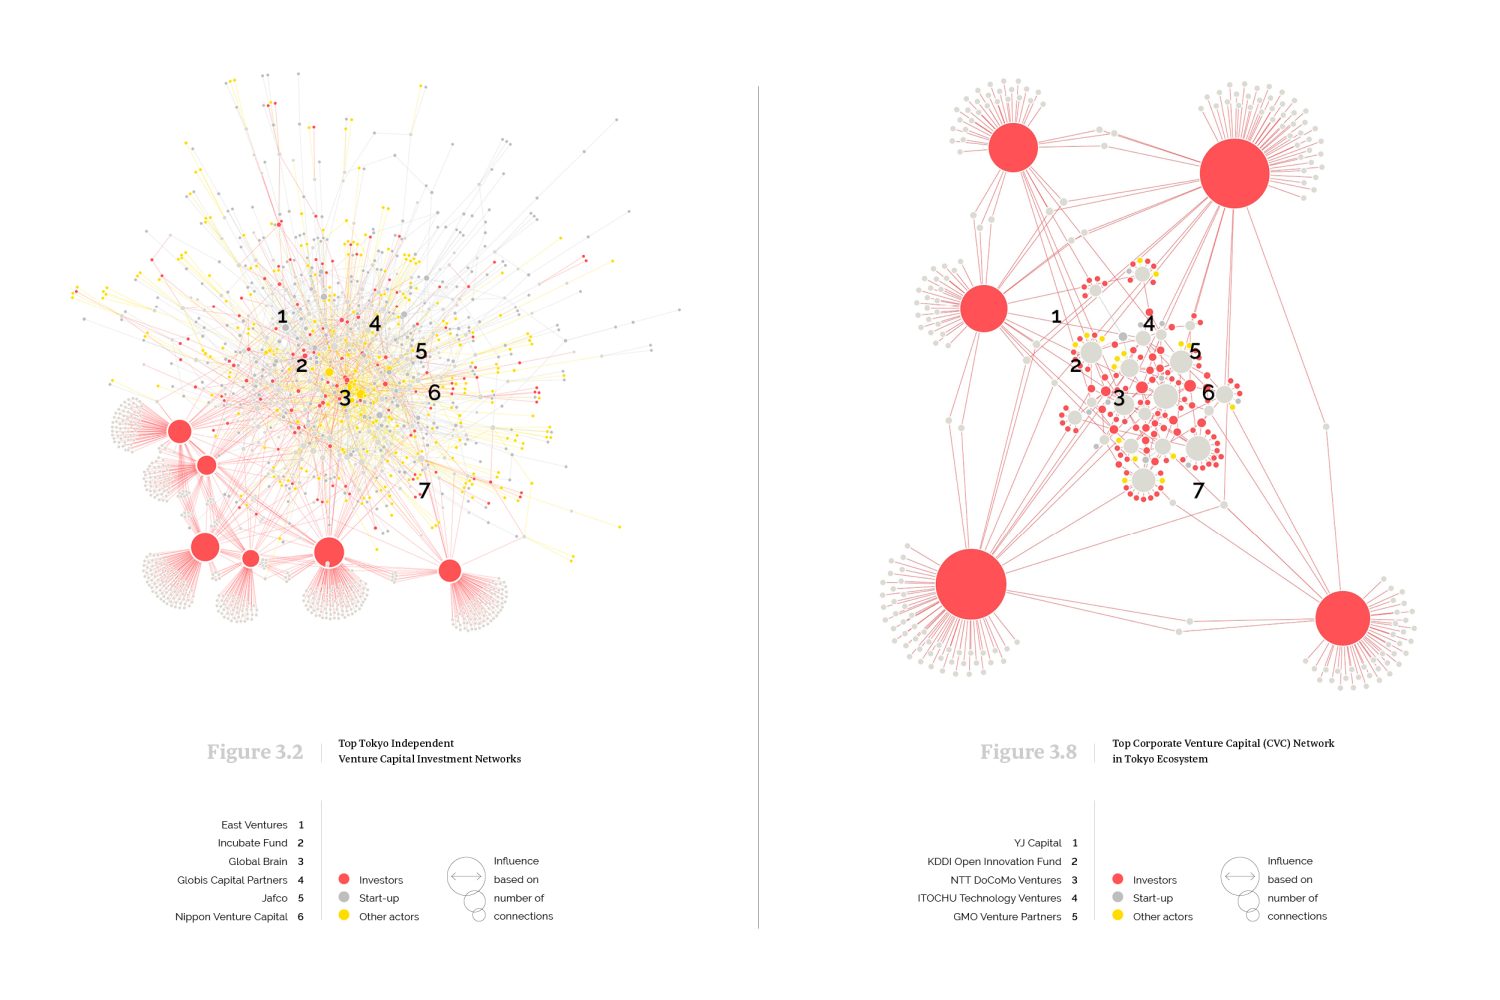 Two network graphs are shown in close-up in the visual as a poster. On the left, the top independent venture capital investment networks in Tokyo are presented and on the right, the top corporate venture capital network in the Tokyo ecosystem. Underneath the graphs, information to aid reading and understanding such as their titles and captions are provided.